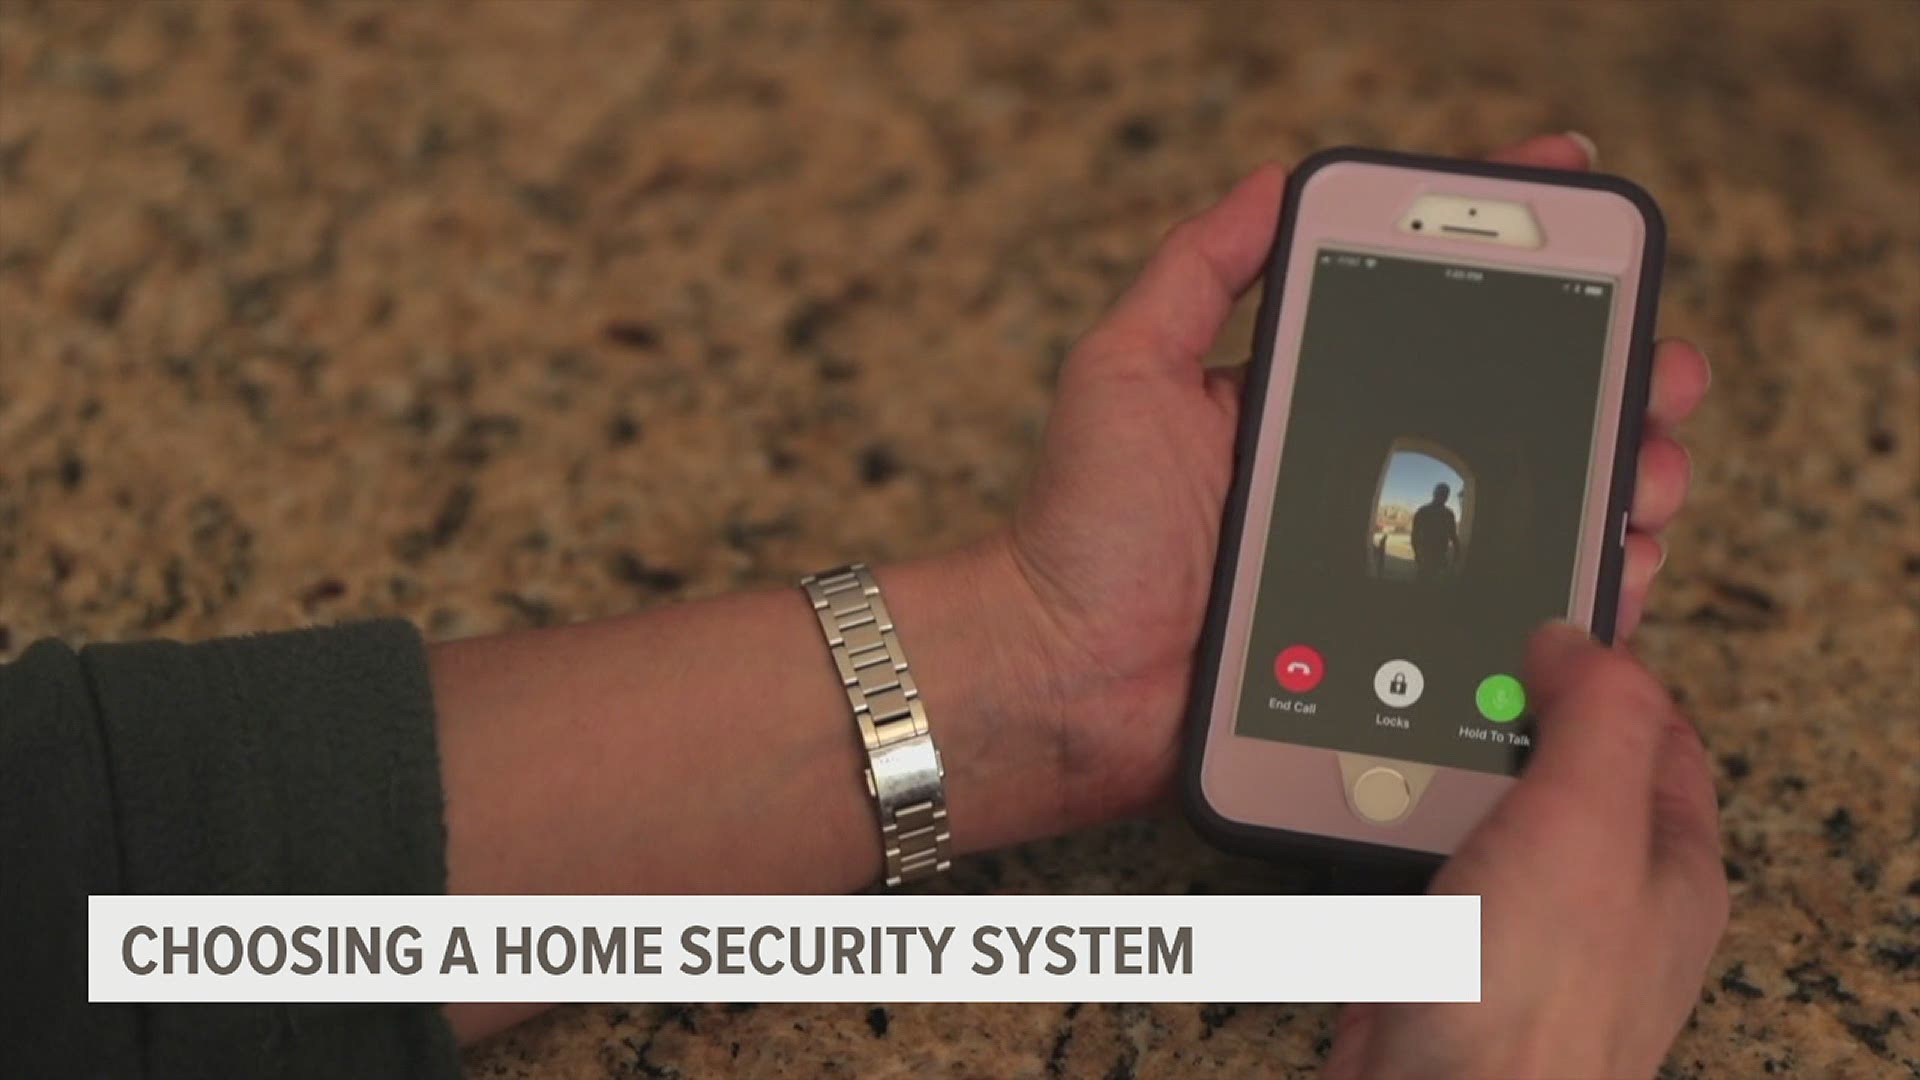 Jason Moyer, Operations Manager at ESCO Security, spoke with FOX43's Jackie De Tore about what to consider when you're protecting your home.